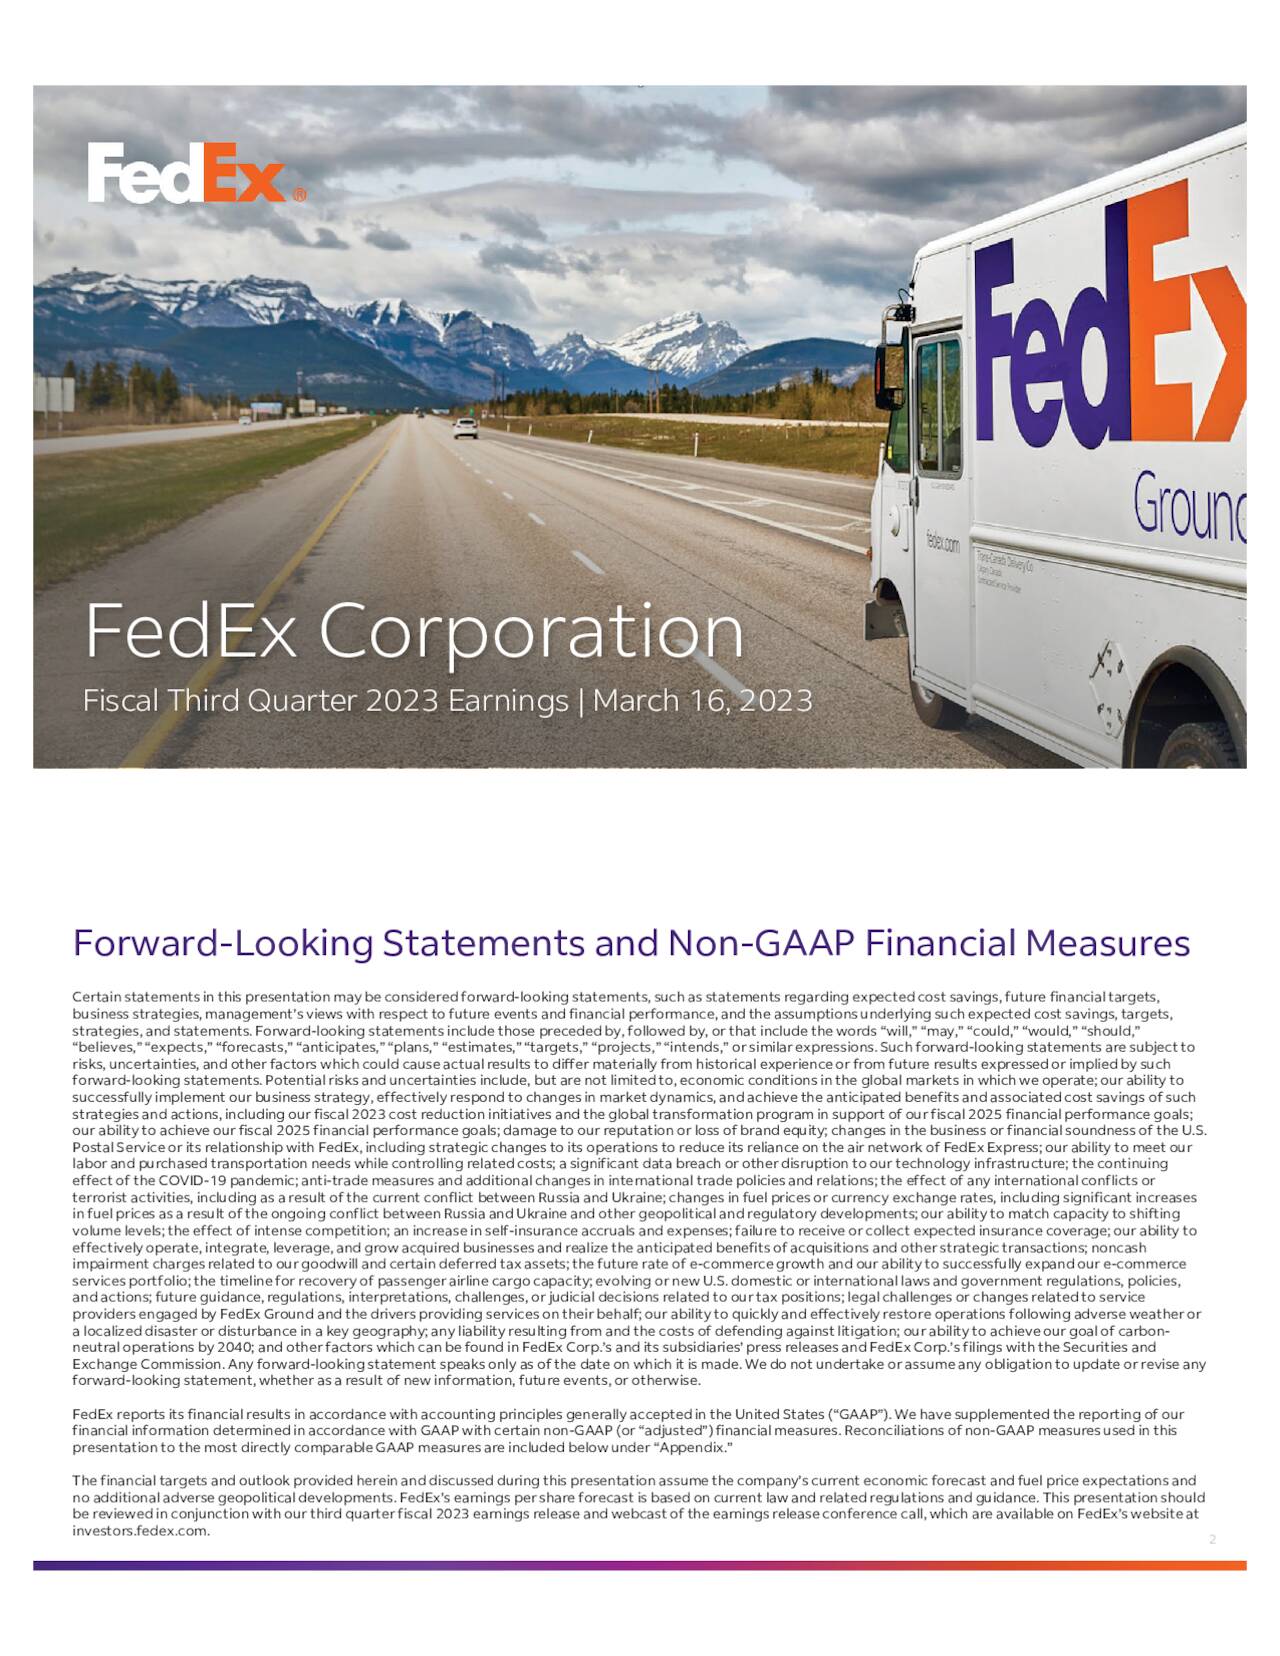 FedEx Corporation 2023 Q3 Results Earnings Call Presentation (NYSE